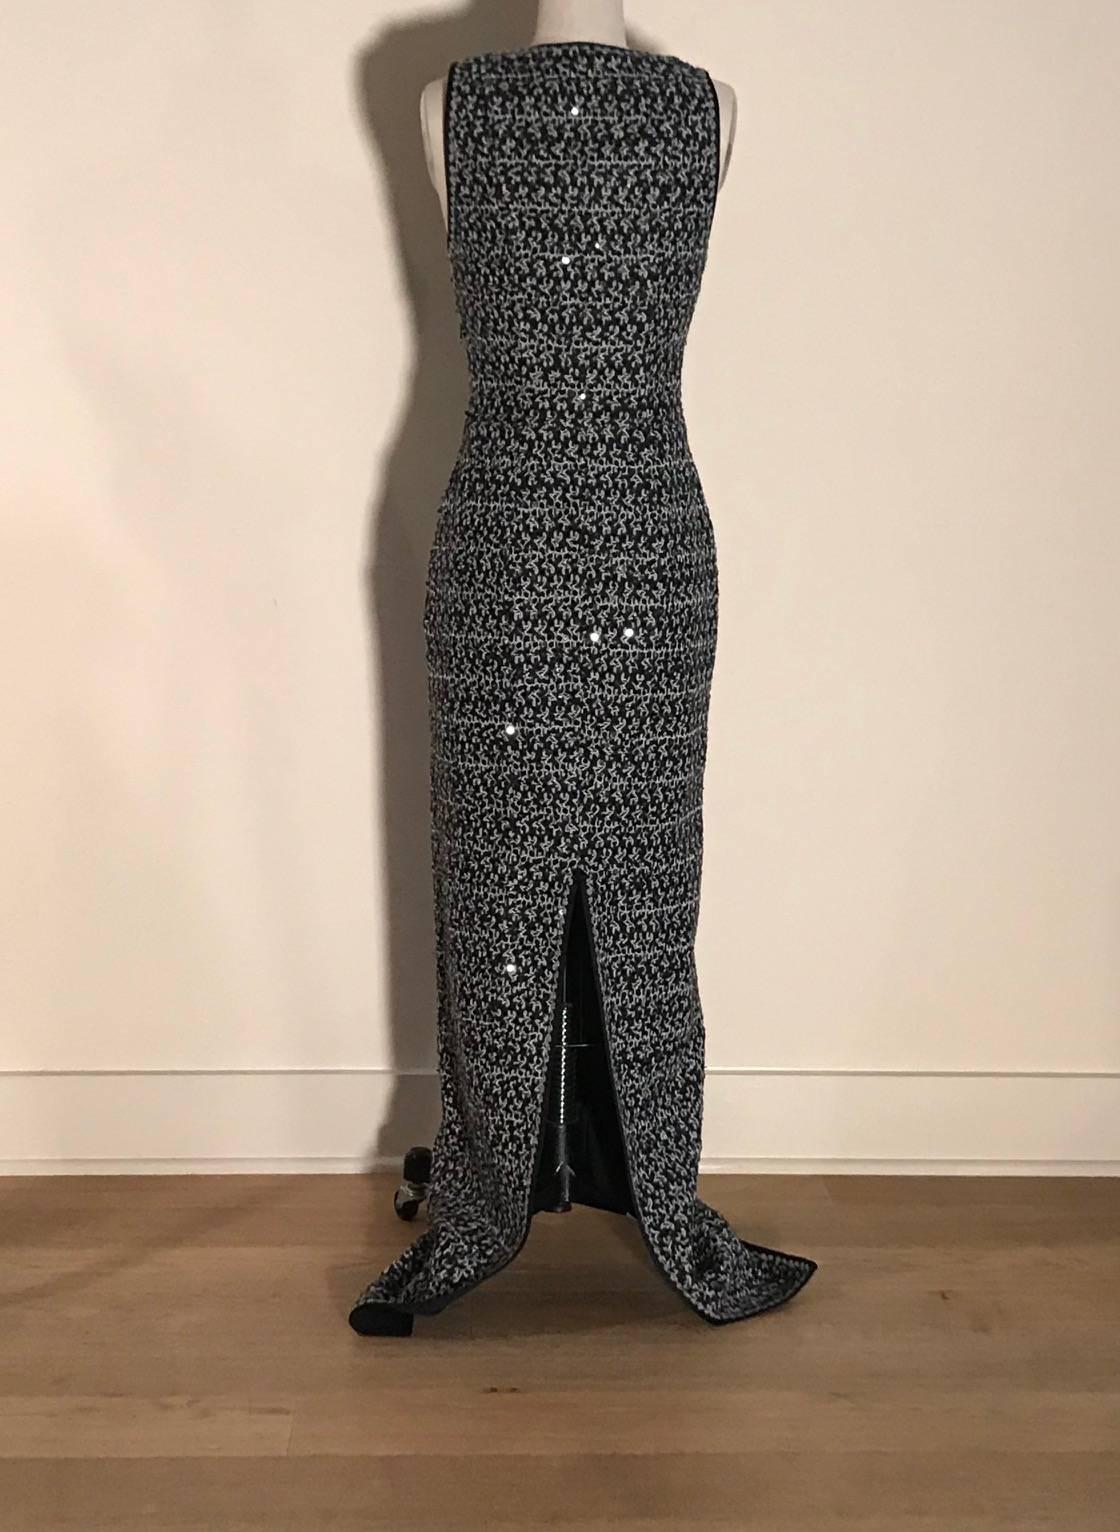 Missoni black and white knit maxi dress with black sequin accents throughout. Partial side zip. 

70% wool, 30% rayon.
Fully lined in 80% nylon, 20% elastane.

Made in Italy.

Size IT 40, seems to best fit US 2. Slightly stretchy, measurements taken